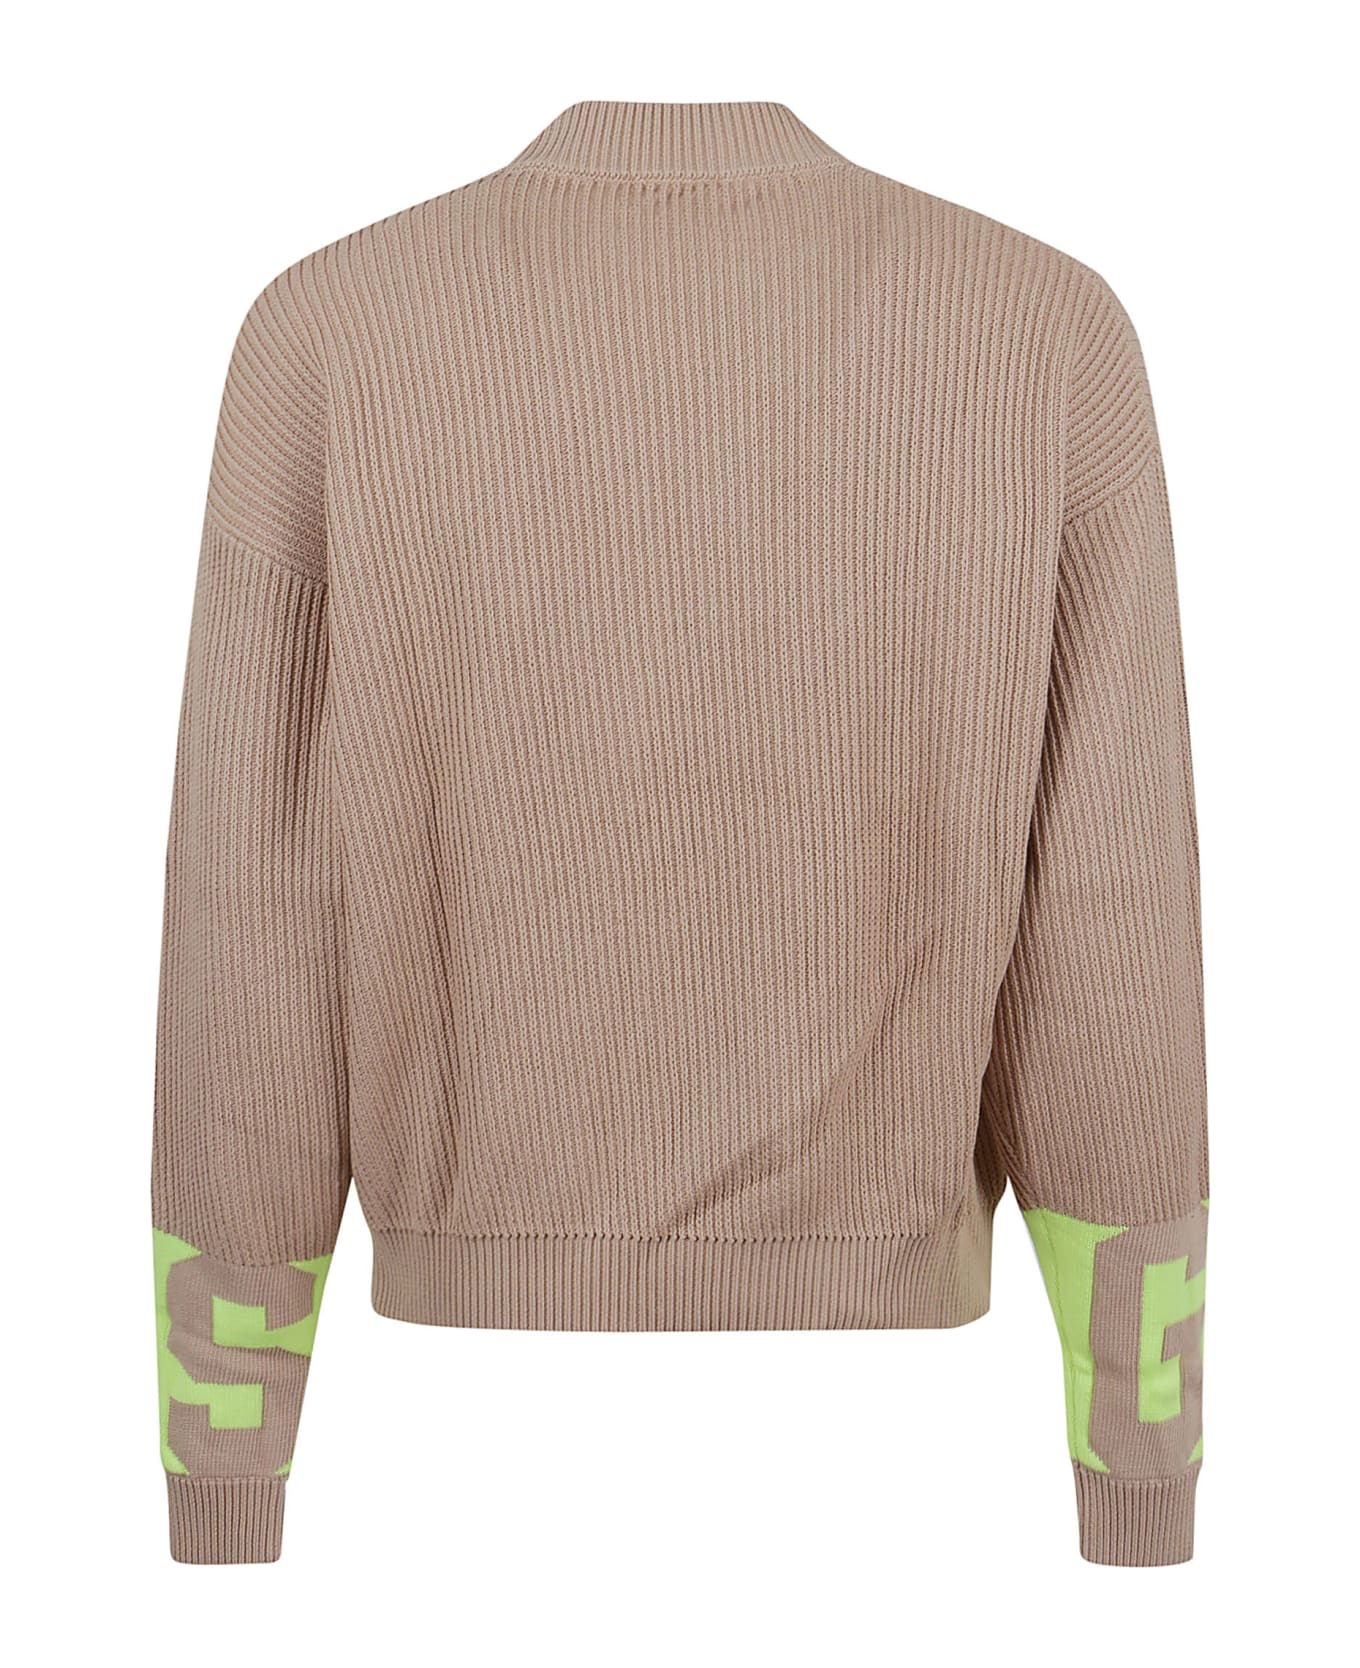 GCDS Low Band Sweater - Light Brown